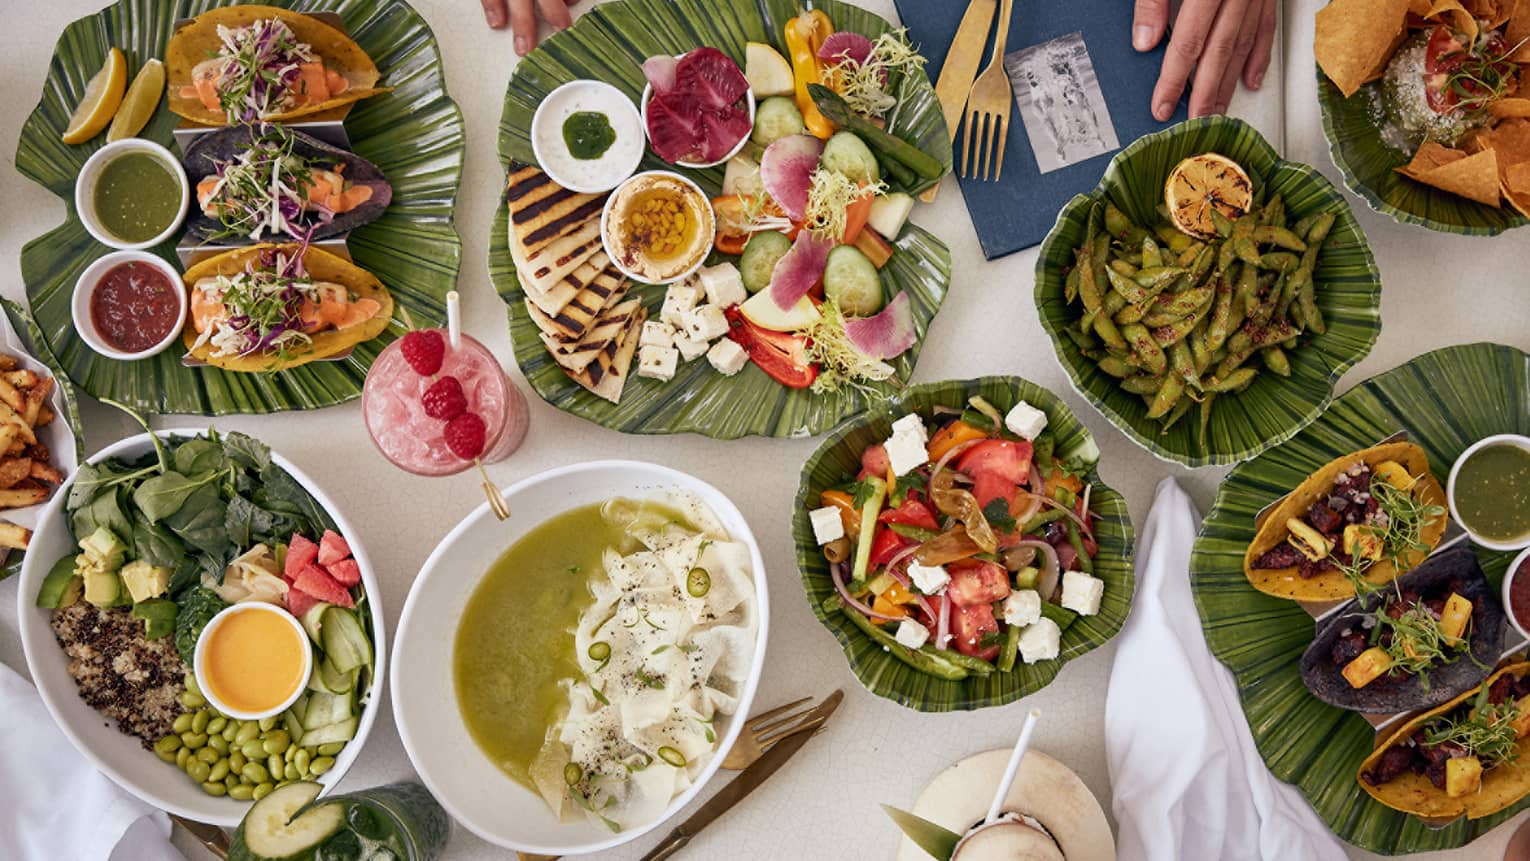 Smorgasbord of tropical dishes artfully displayed on green ceramic plates served at one of the Surfside restaurants of note at Four Seasons Surf Club, Florida.